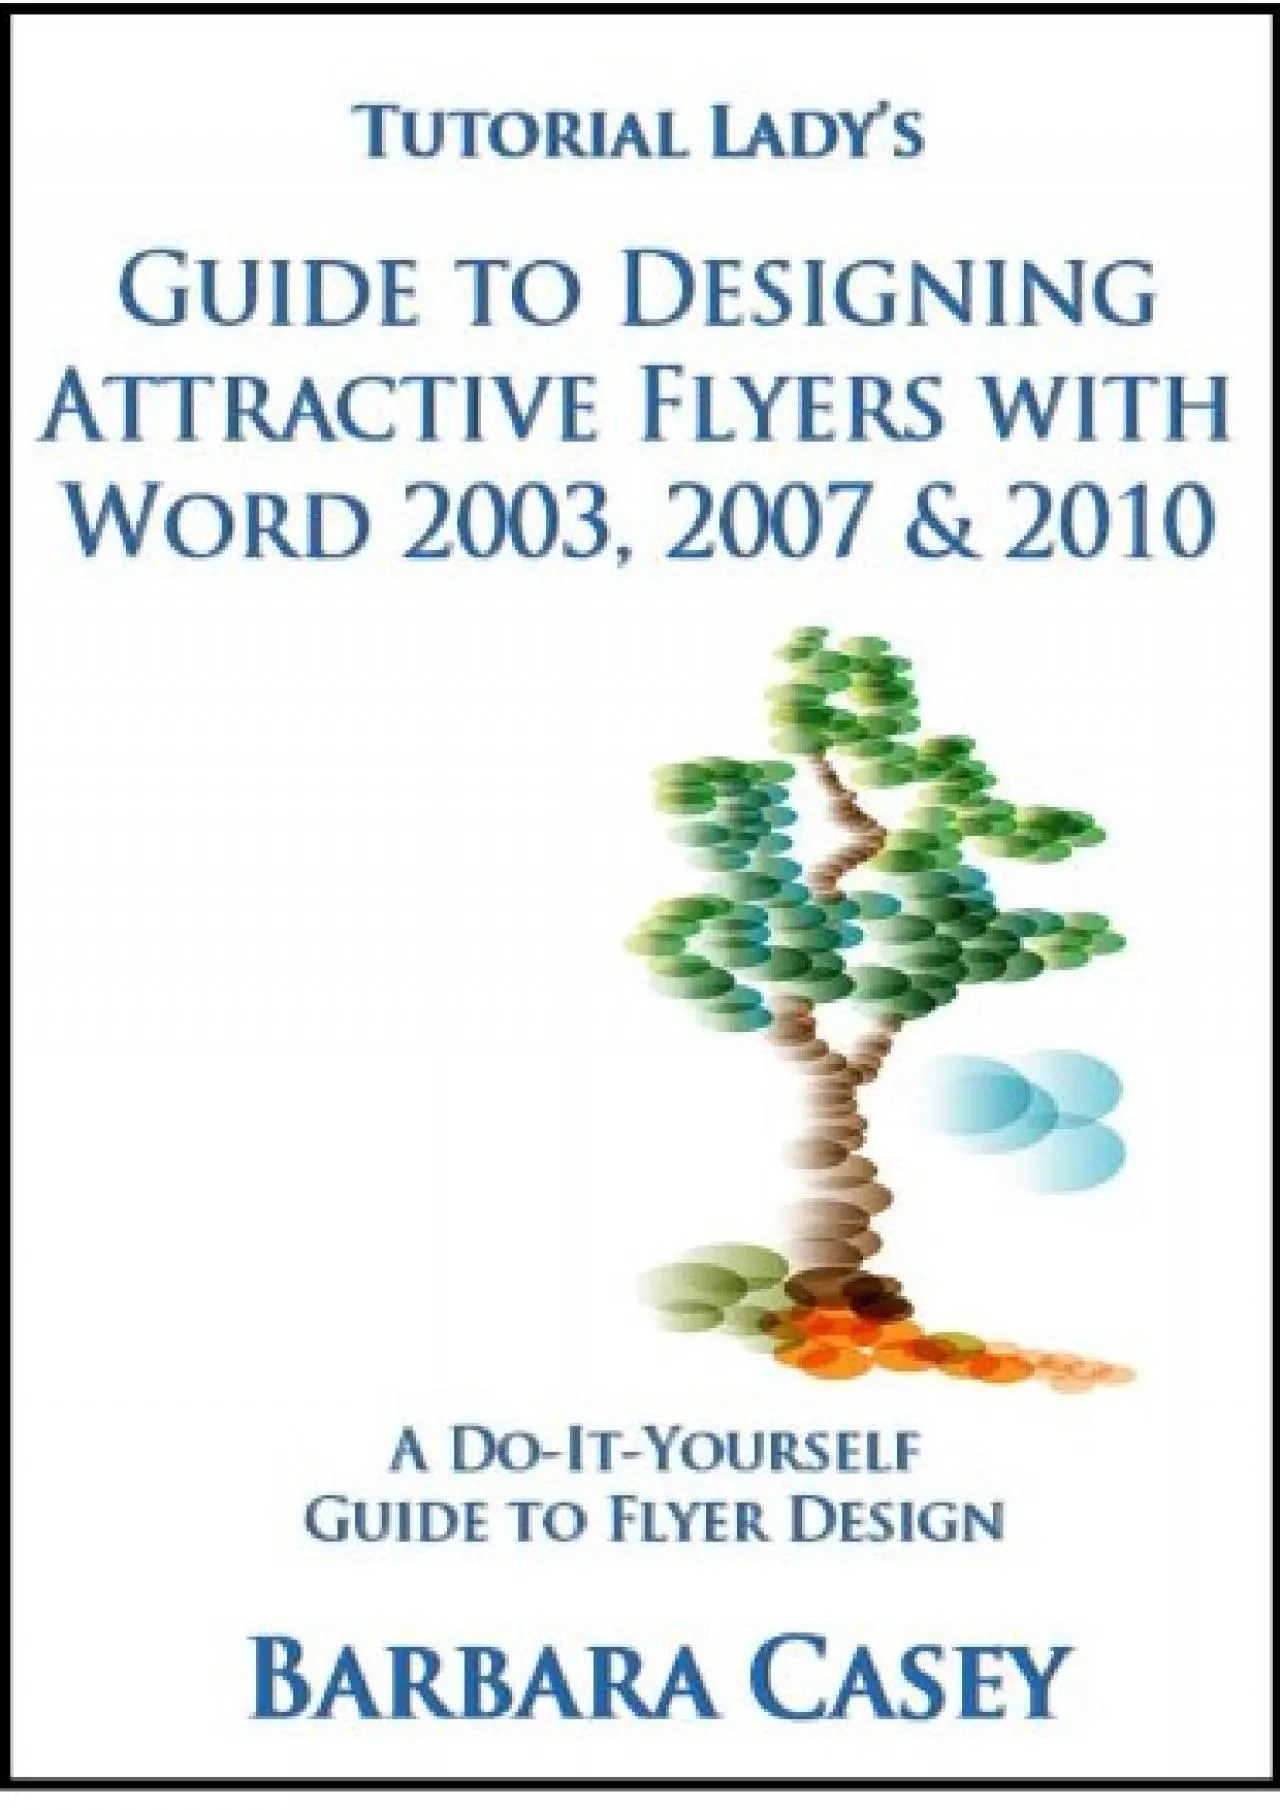 (EBOOK)-Tutorial Lady\'s Guide to Designing Attractive Flyers with Word 2003, 2007  2010